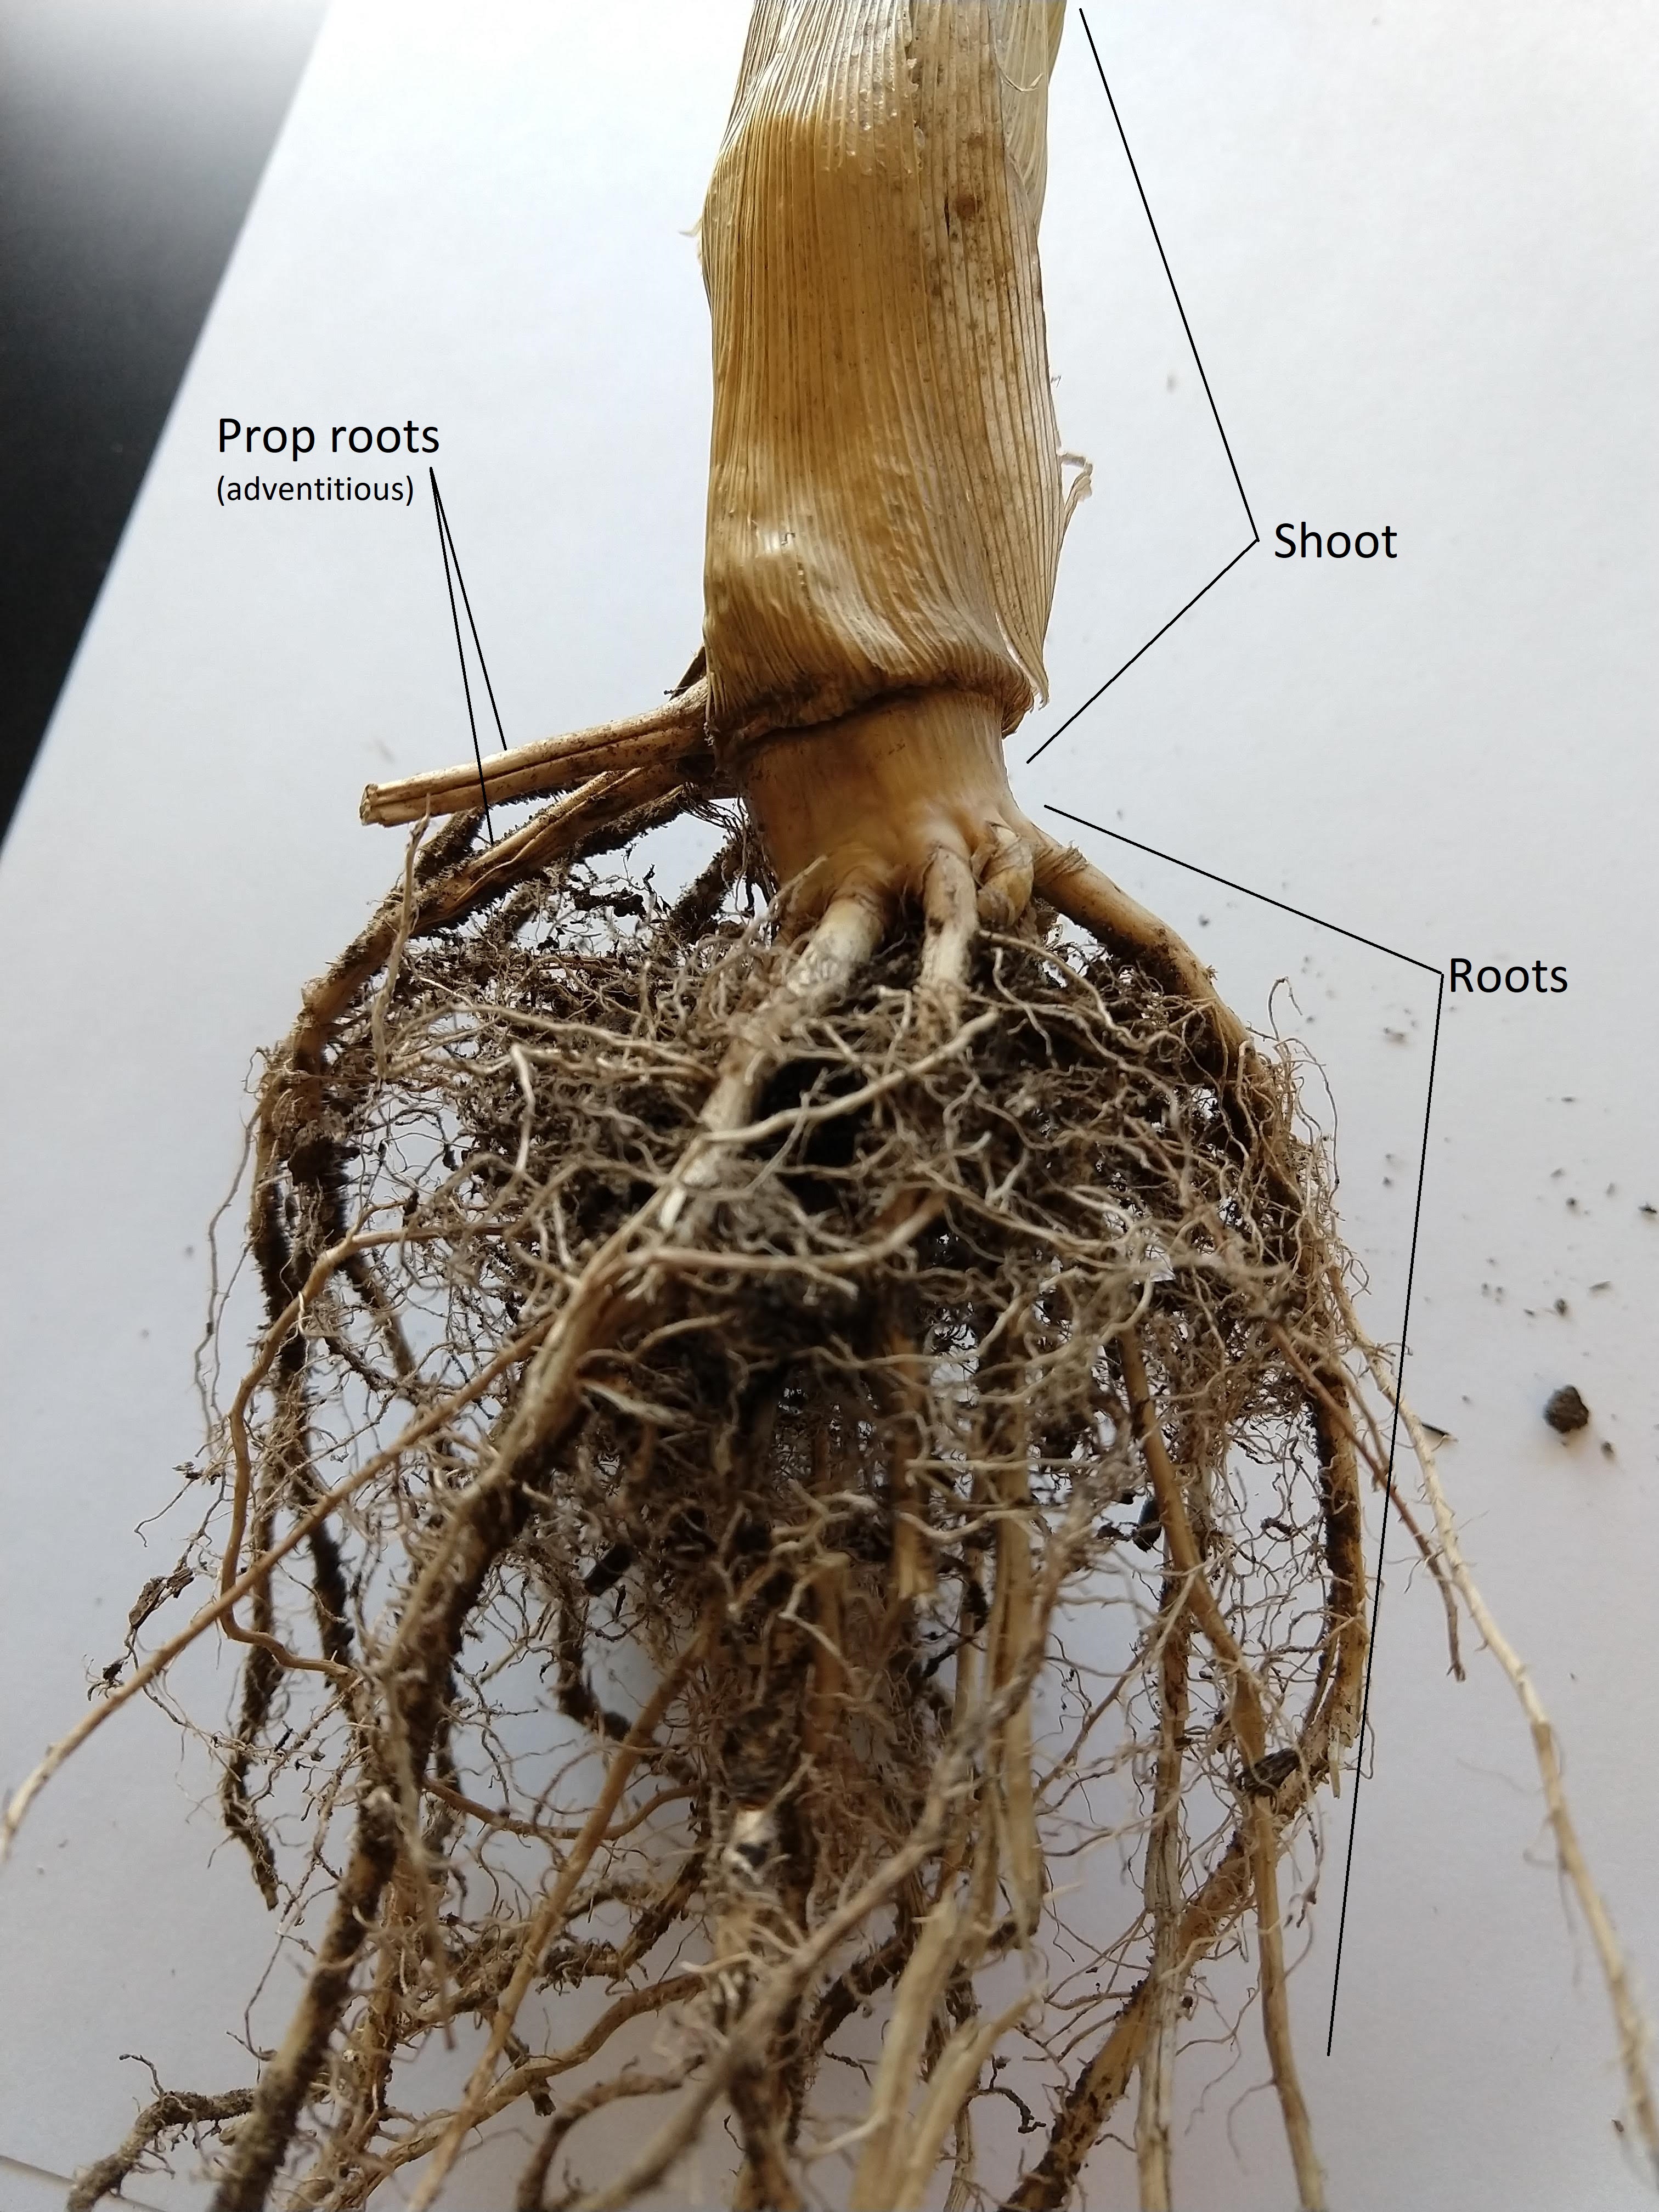 Corn with prop roots that emerge above its netted root system